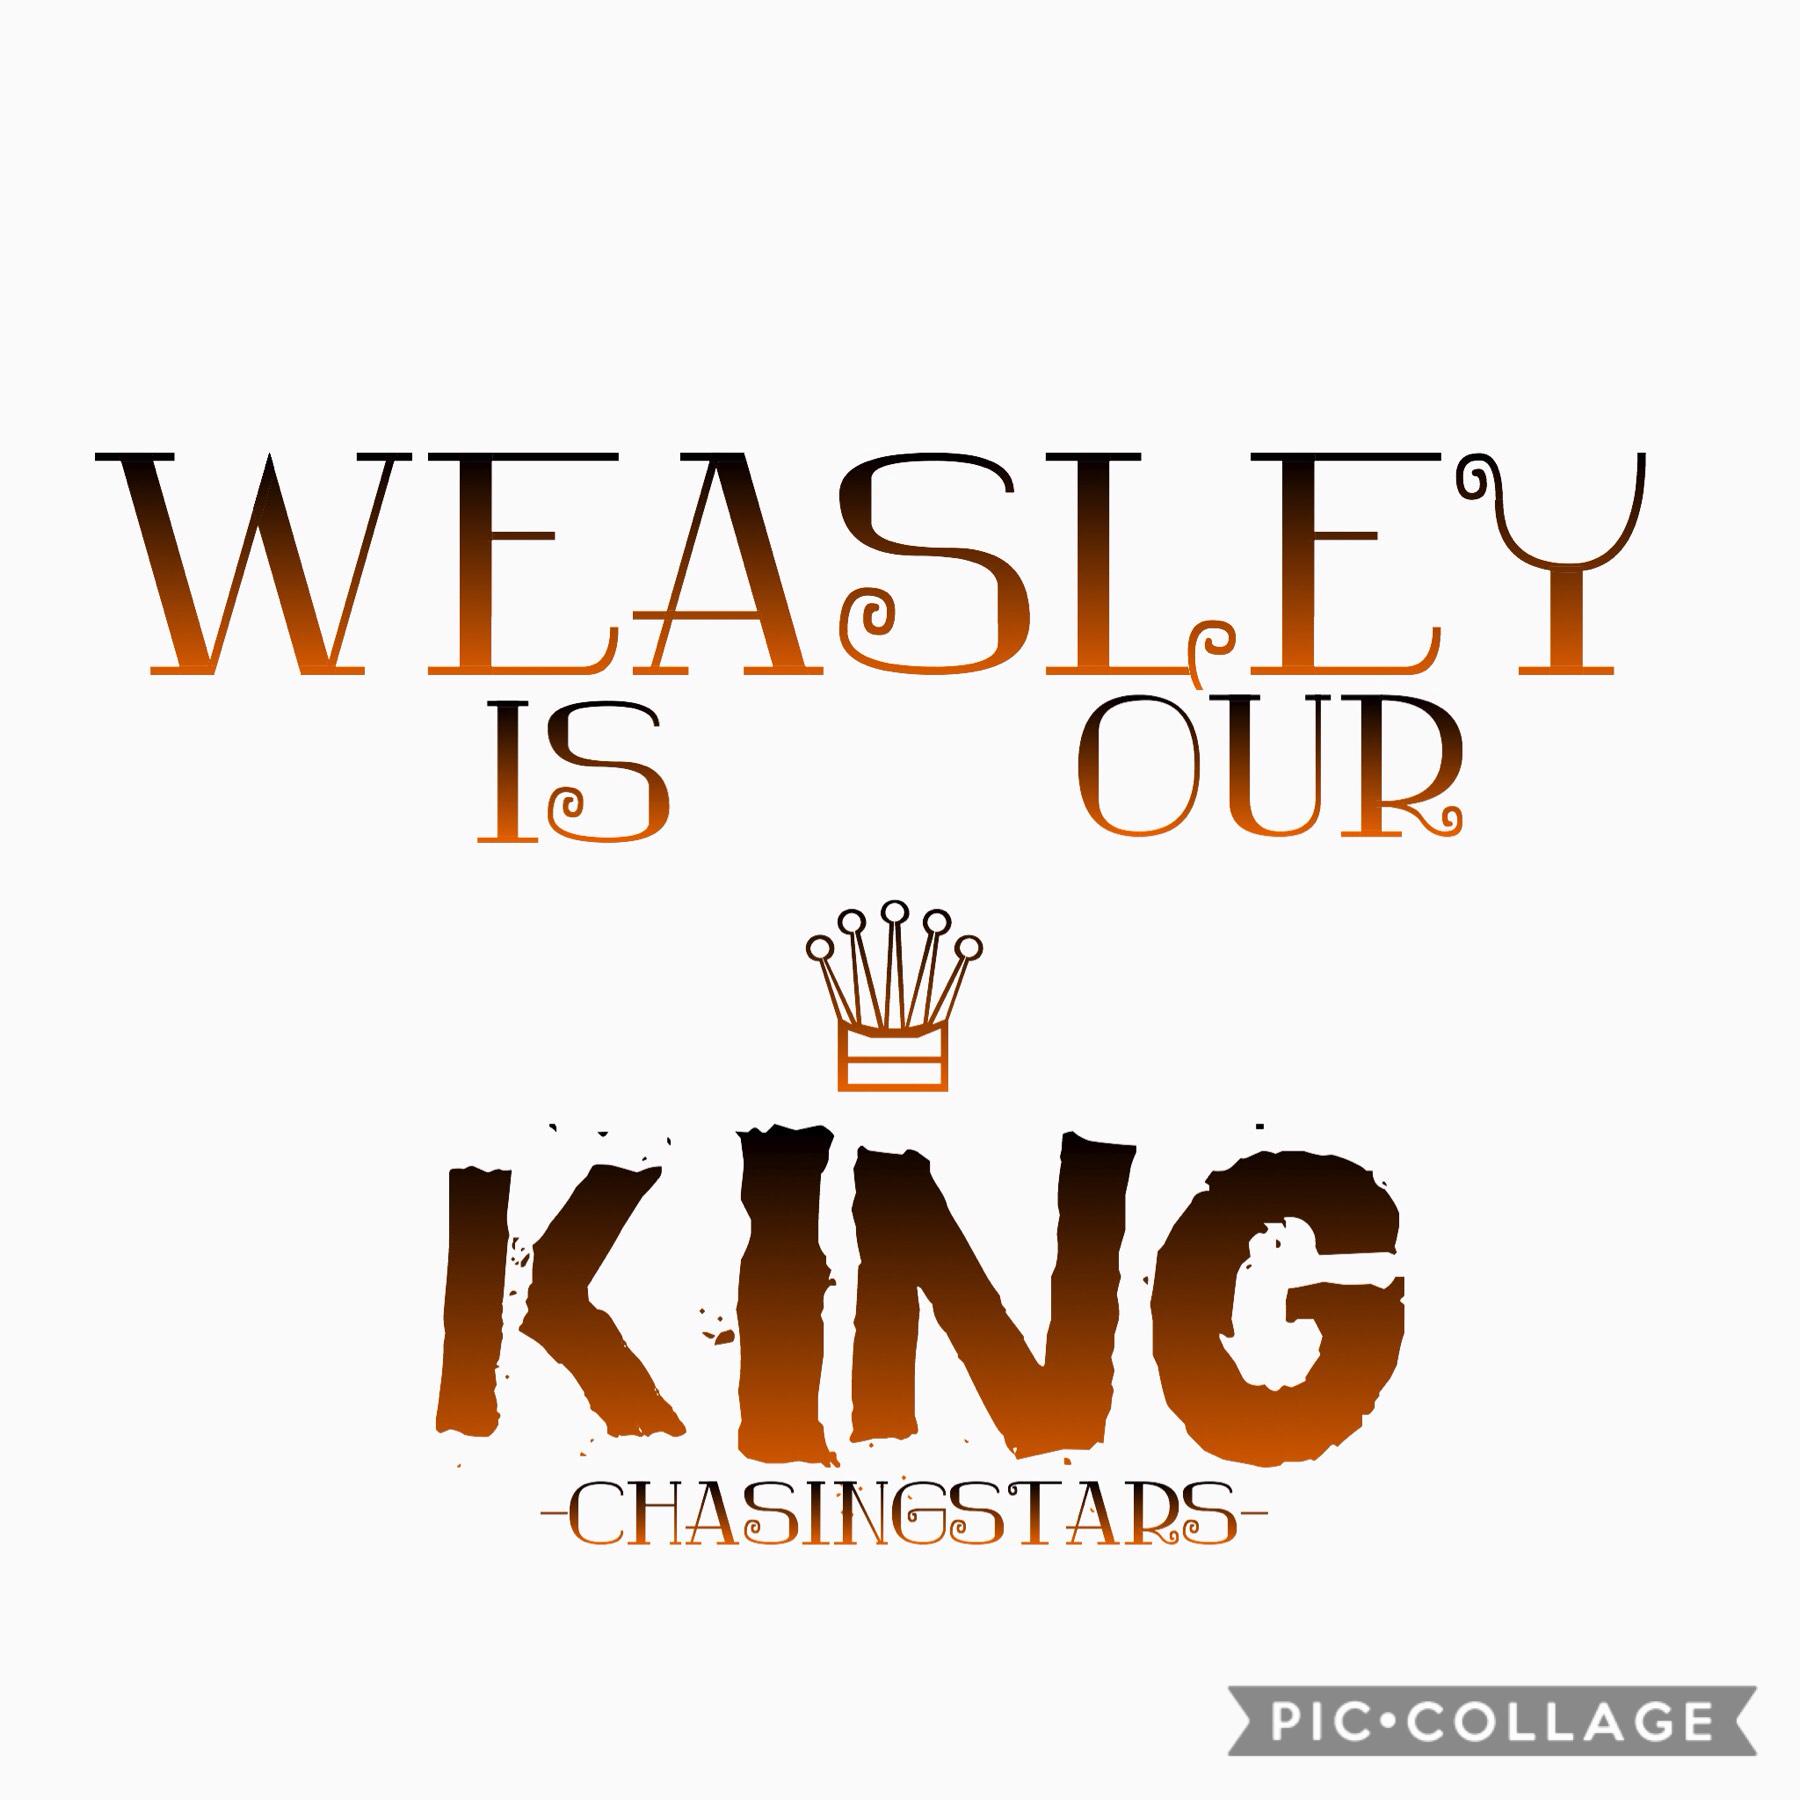 Tappp

Weasley is our King. I loved it when the Gryffindors were singing this! I quite like this, so let me know. Thank you!